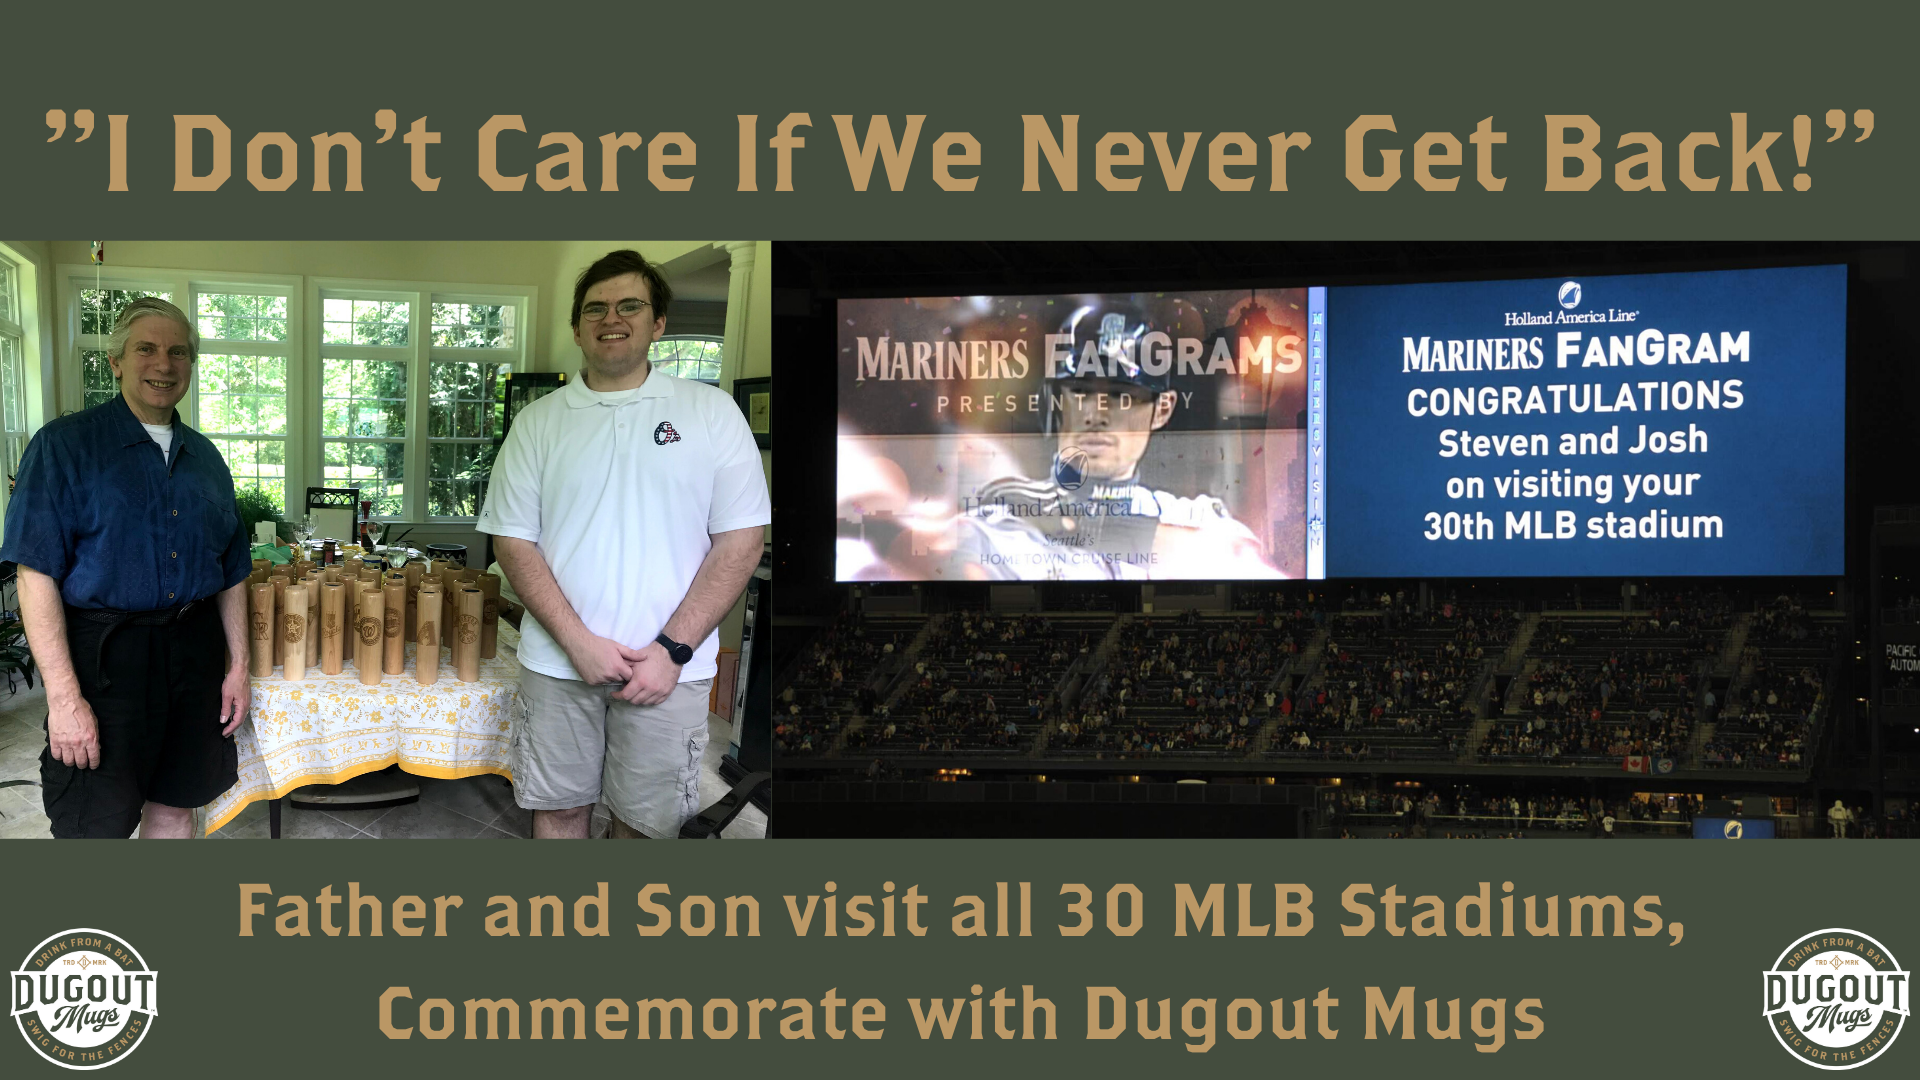 Father Son Visit All 30 MLB Stadiums, Commemorate with Dugout Mugs